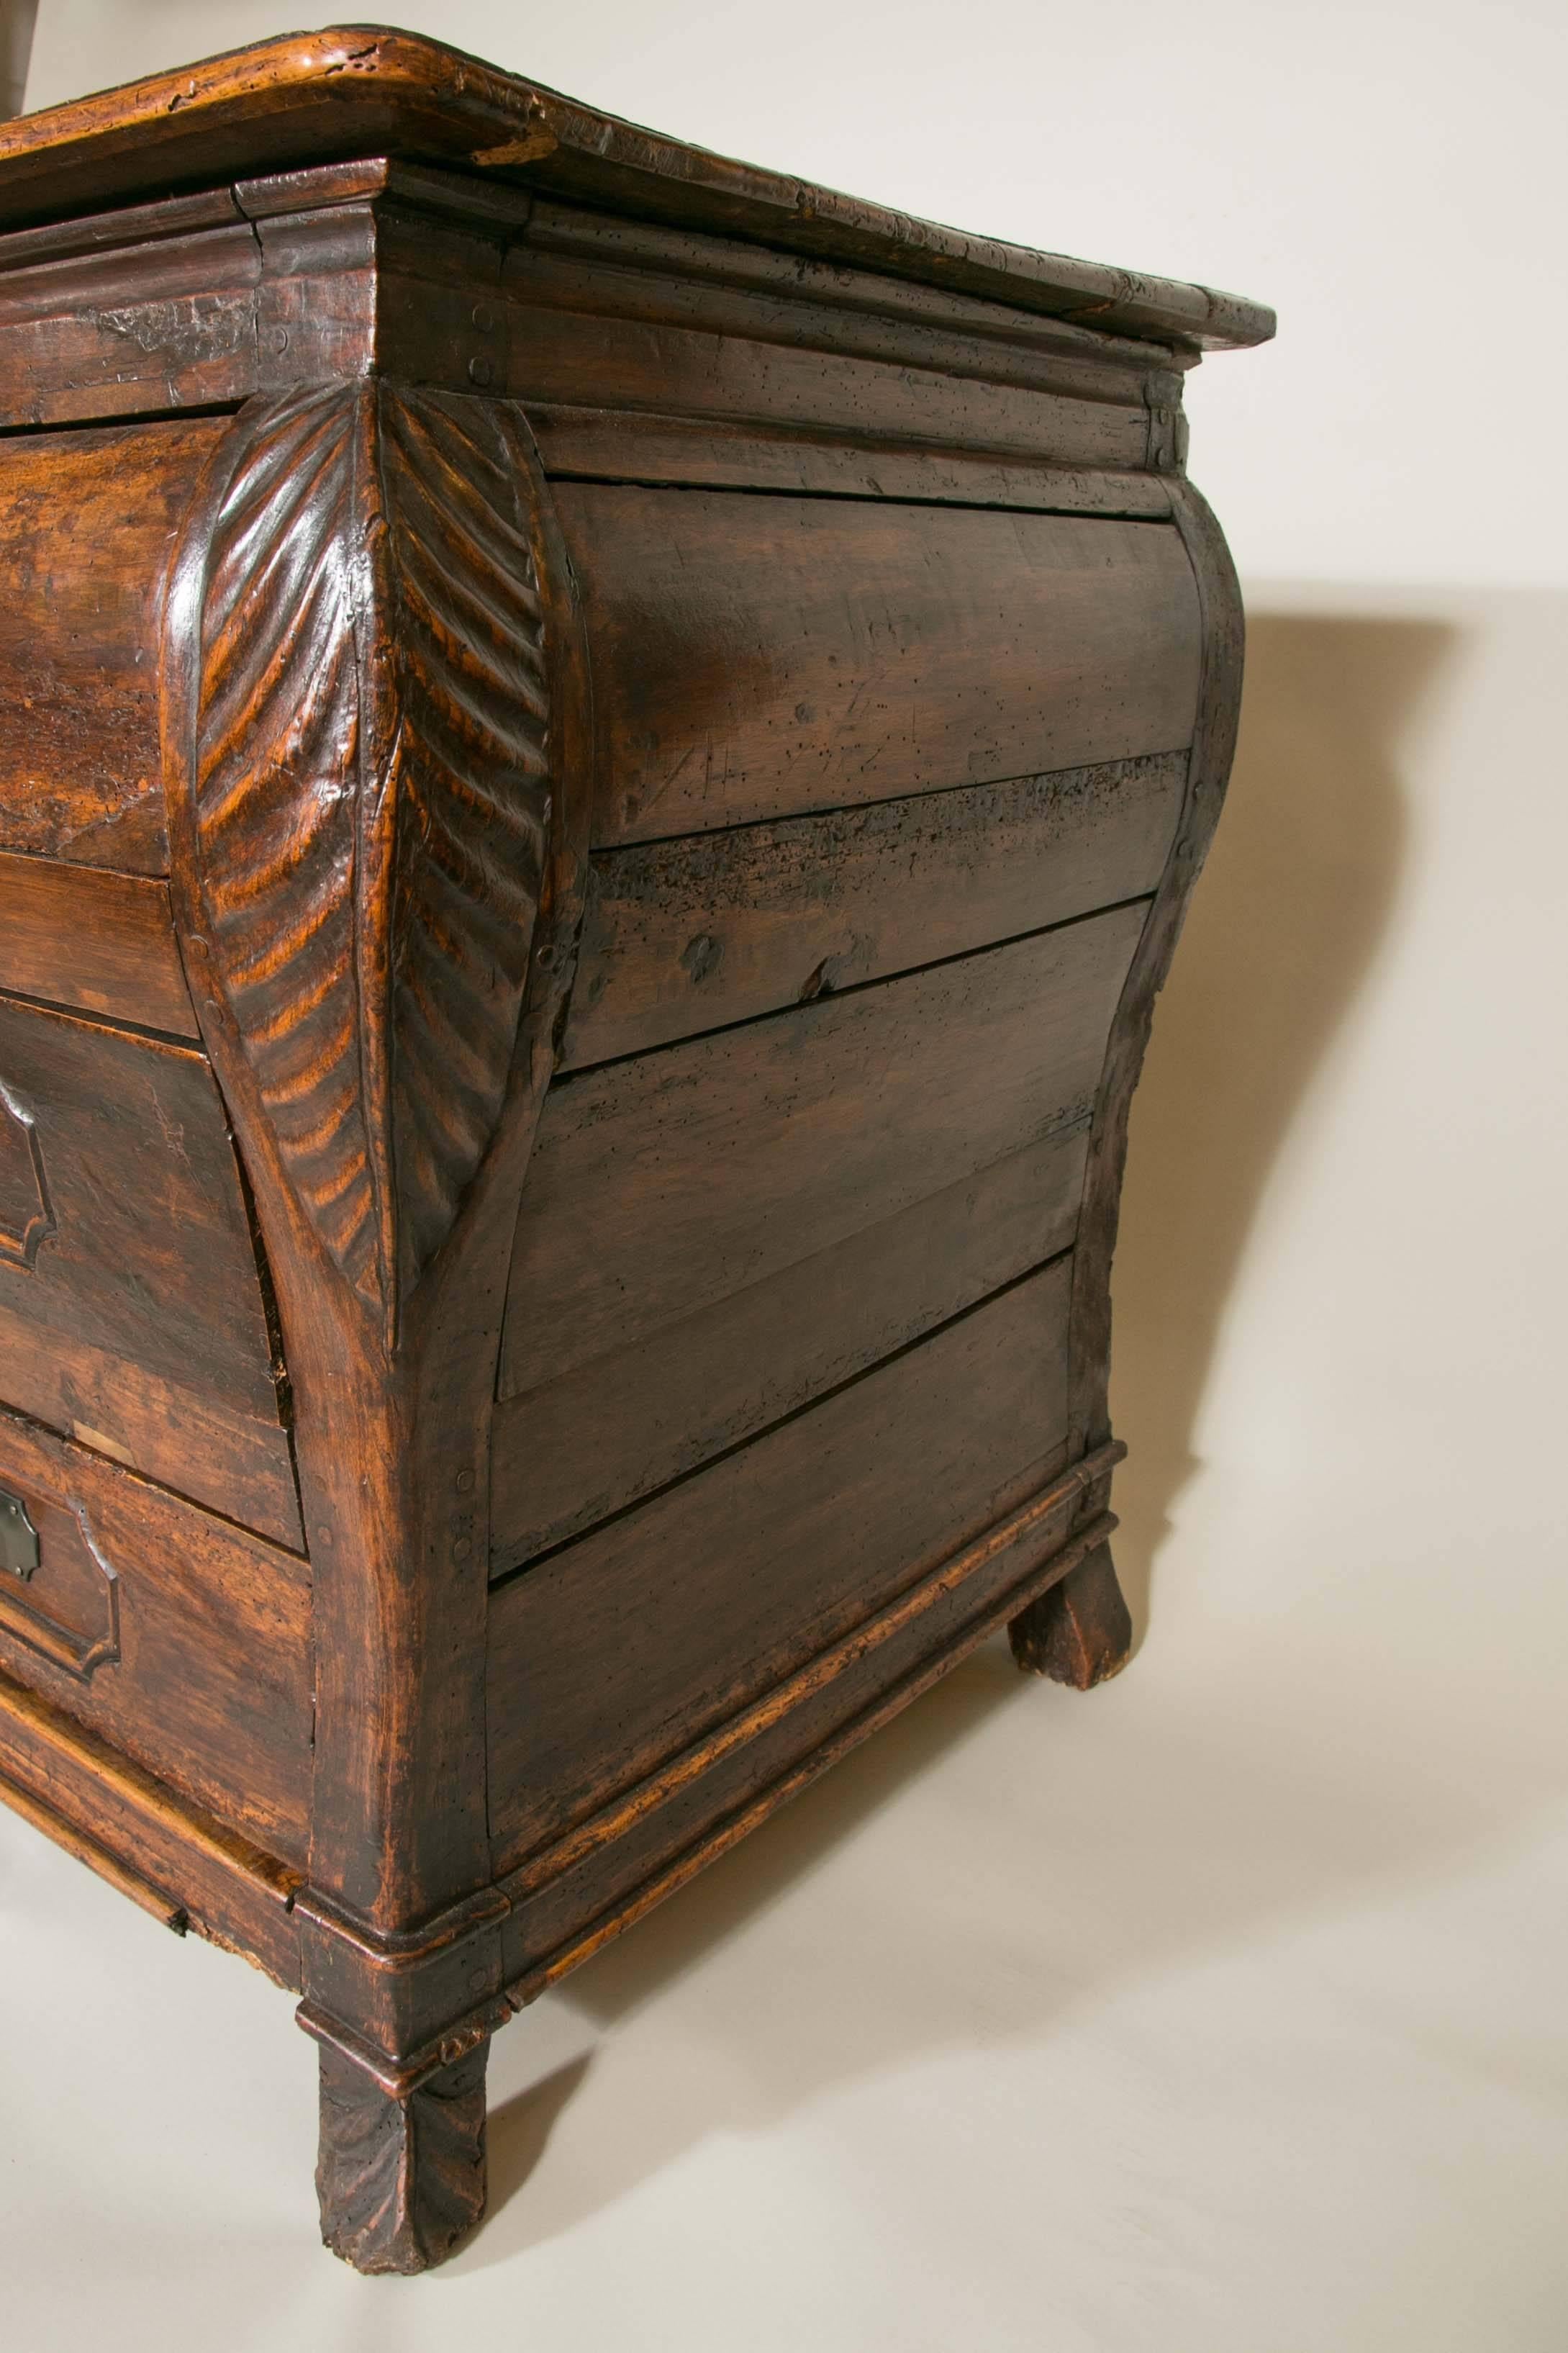 European Fabulous Walnut Commode from the 18th Century, Continental, Period Louis XV